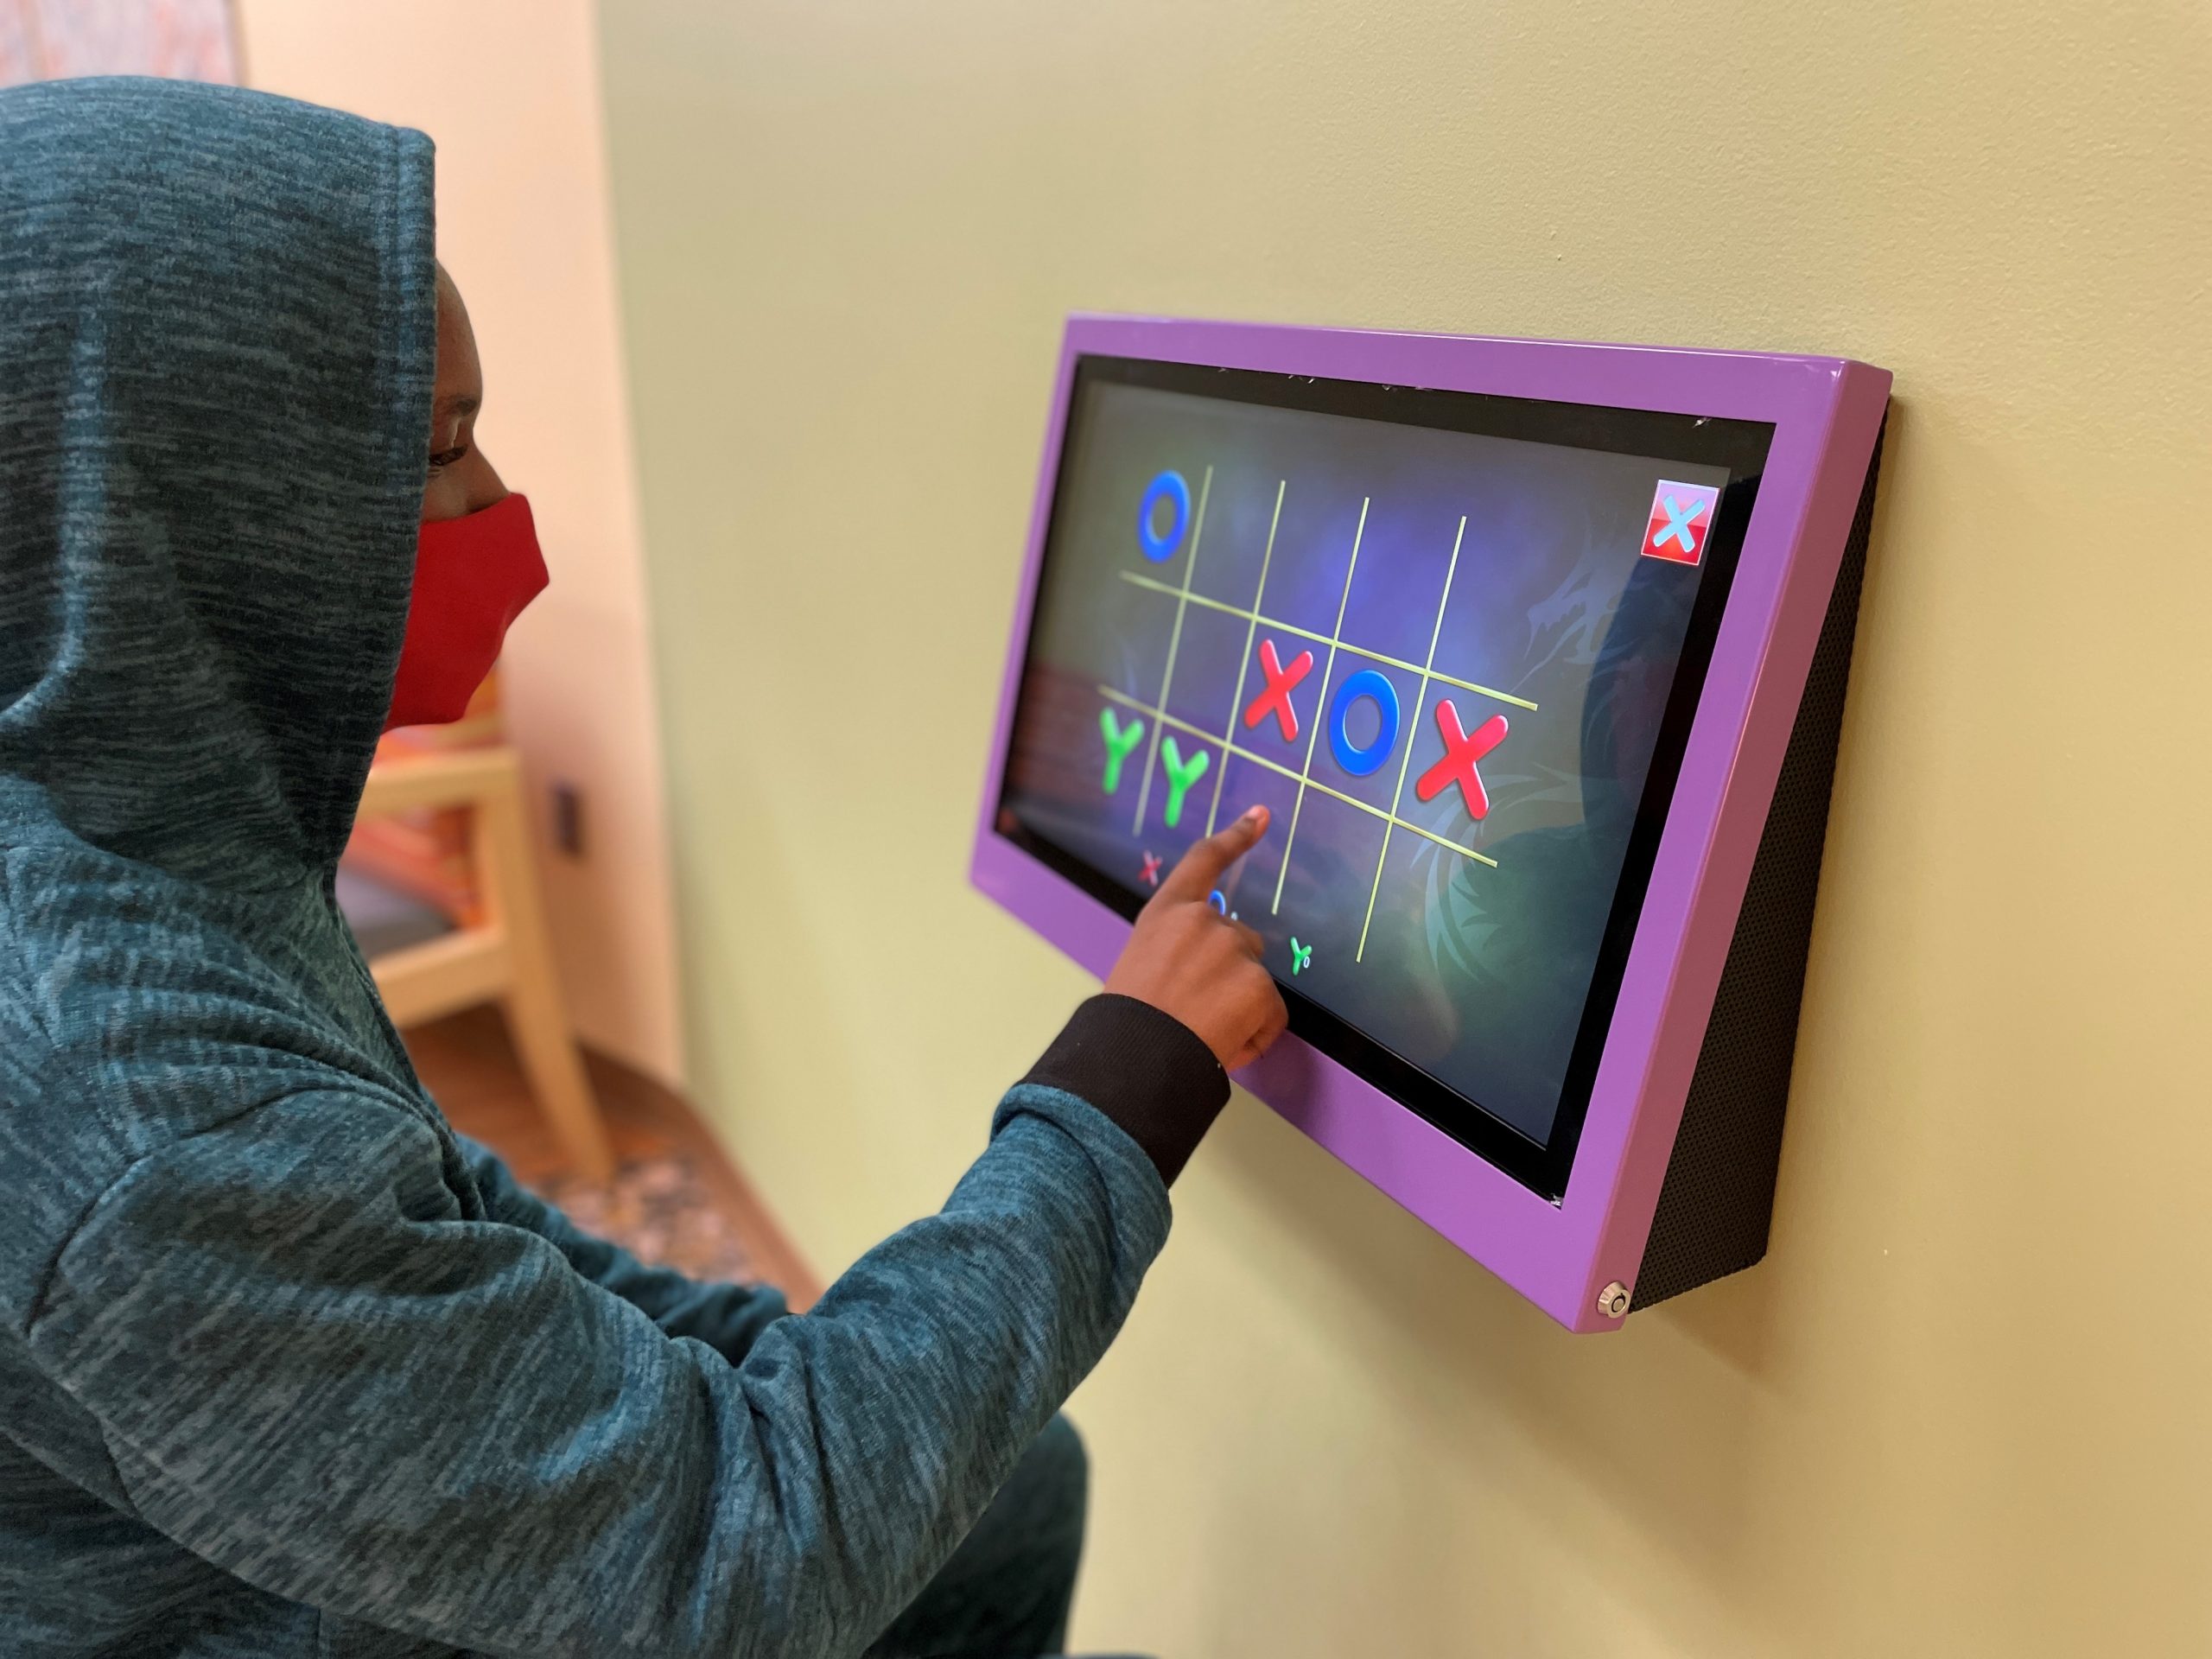 Young patient interacting with digital toy, Grant from The Toy Foundation, Emergency Department, play programs for children, help hospitalized children heal, Level I Pediatric Trauma Center, Child Life Program Coordinator Alyson Weiss